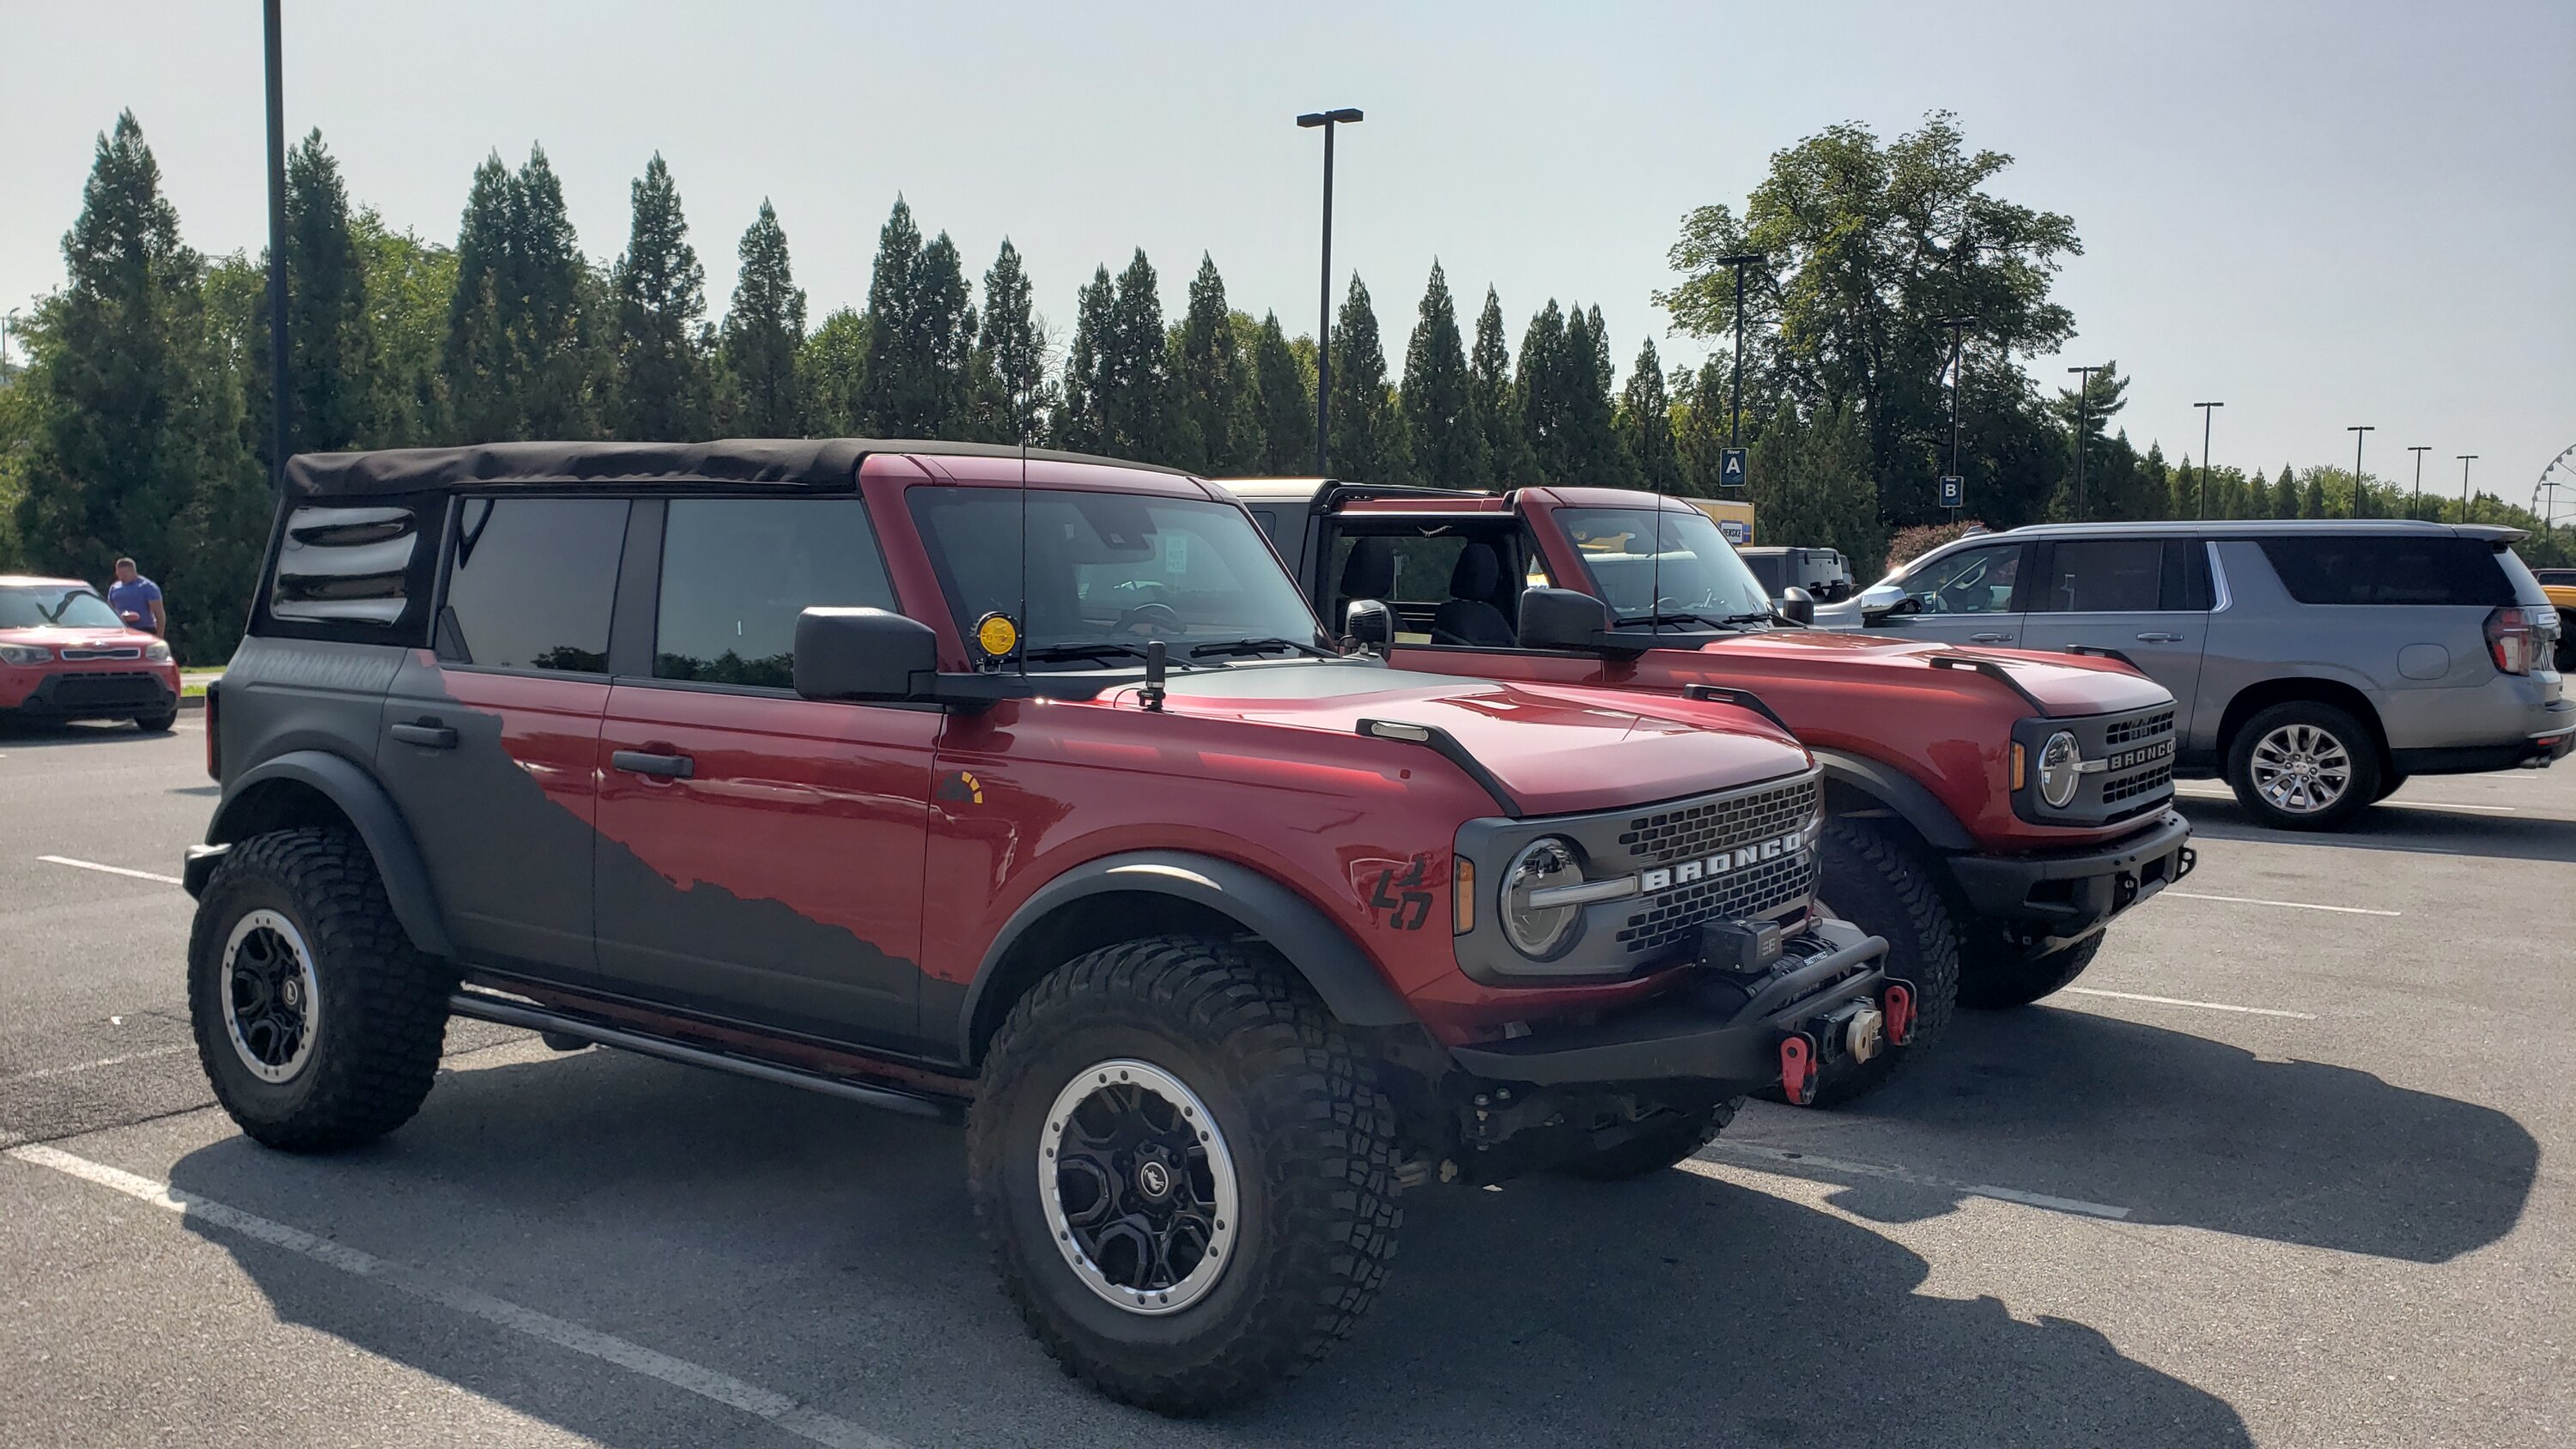 Ford Bronco Rapid Red / Hot Pepper Red comparison? 20230819_164404